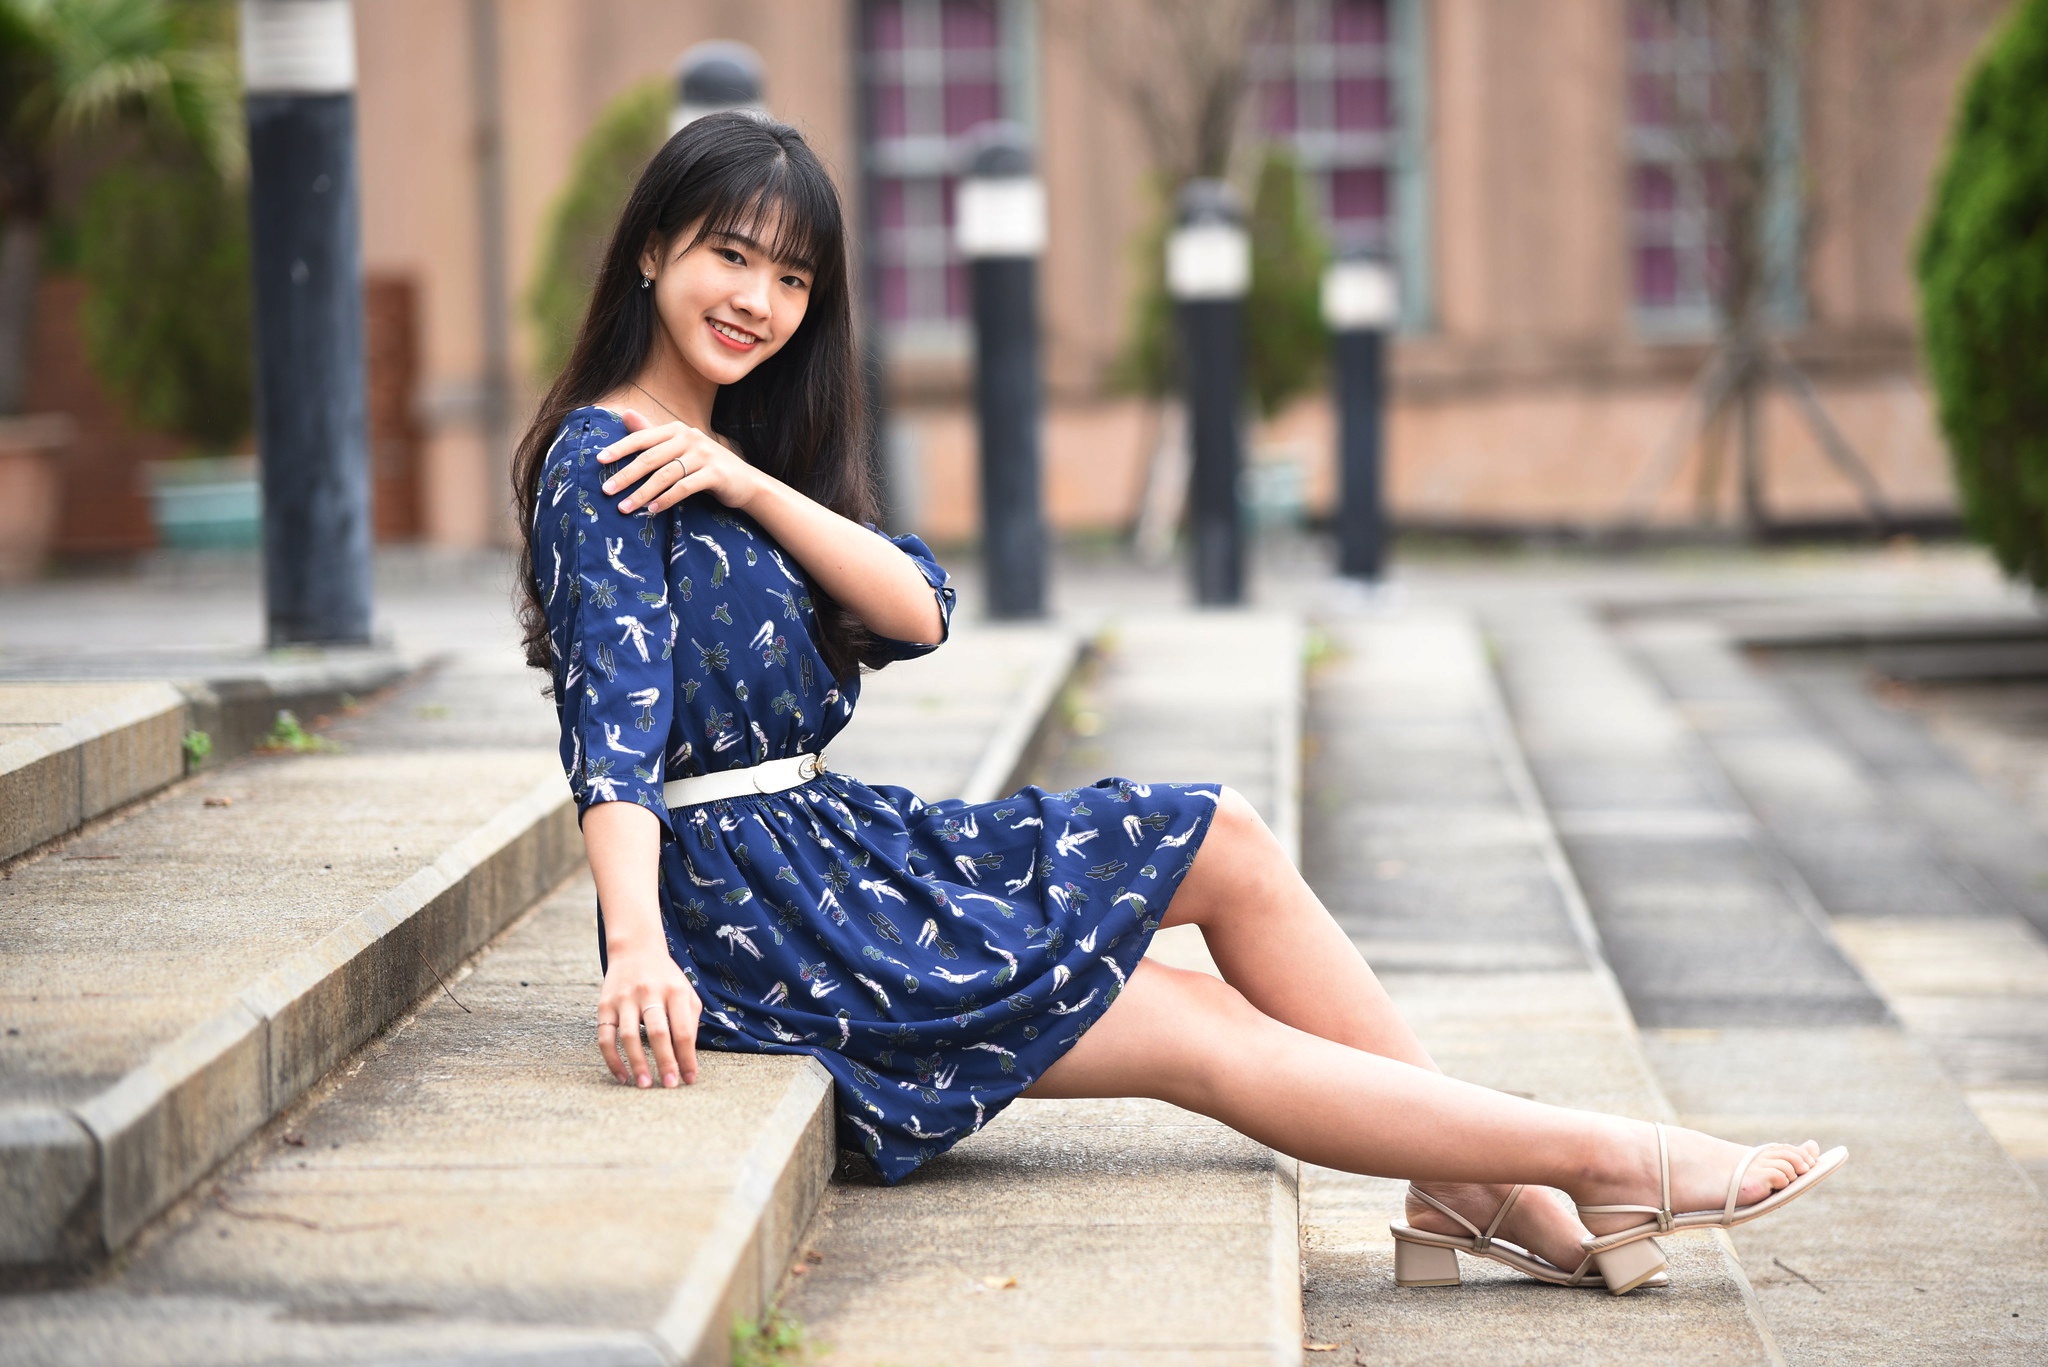 People 2048x1367 Asian women sitting depth of field barefoot sandal earring belt plants bushes brunette stairs poles blue dress model smiling looking at viewer long hair blurred blurry background